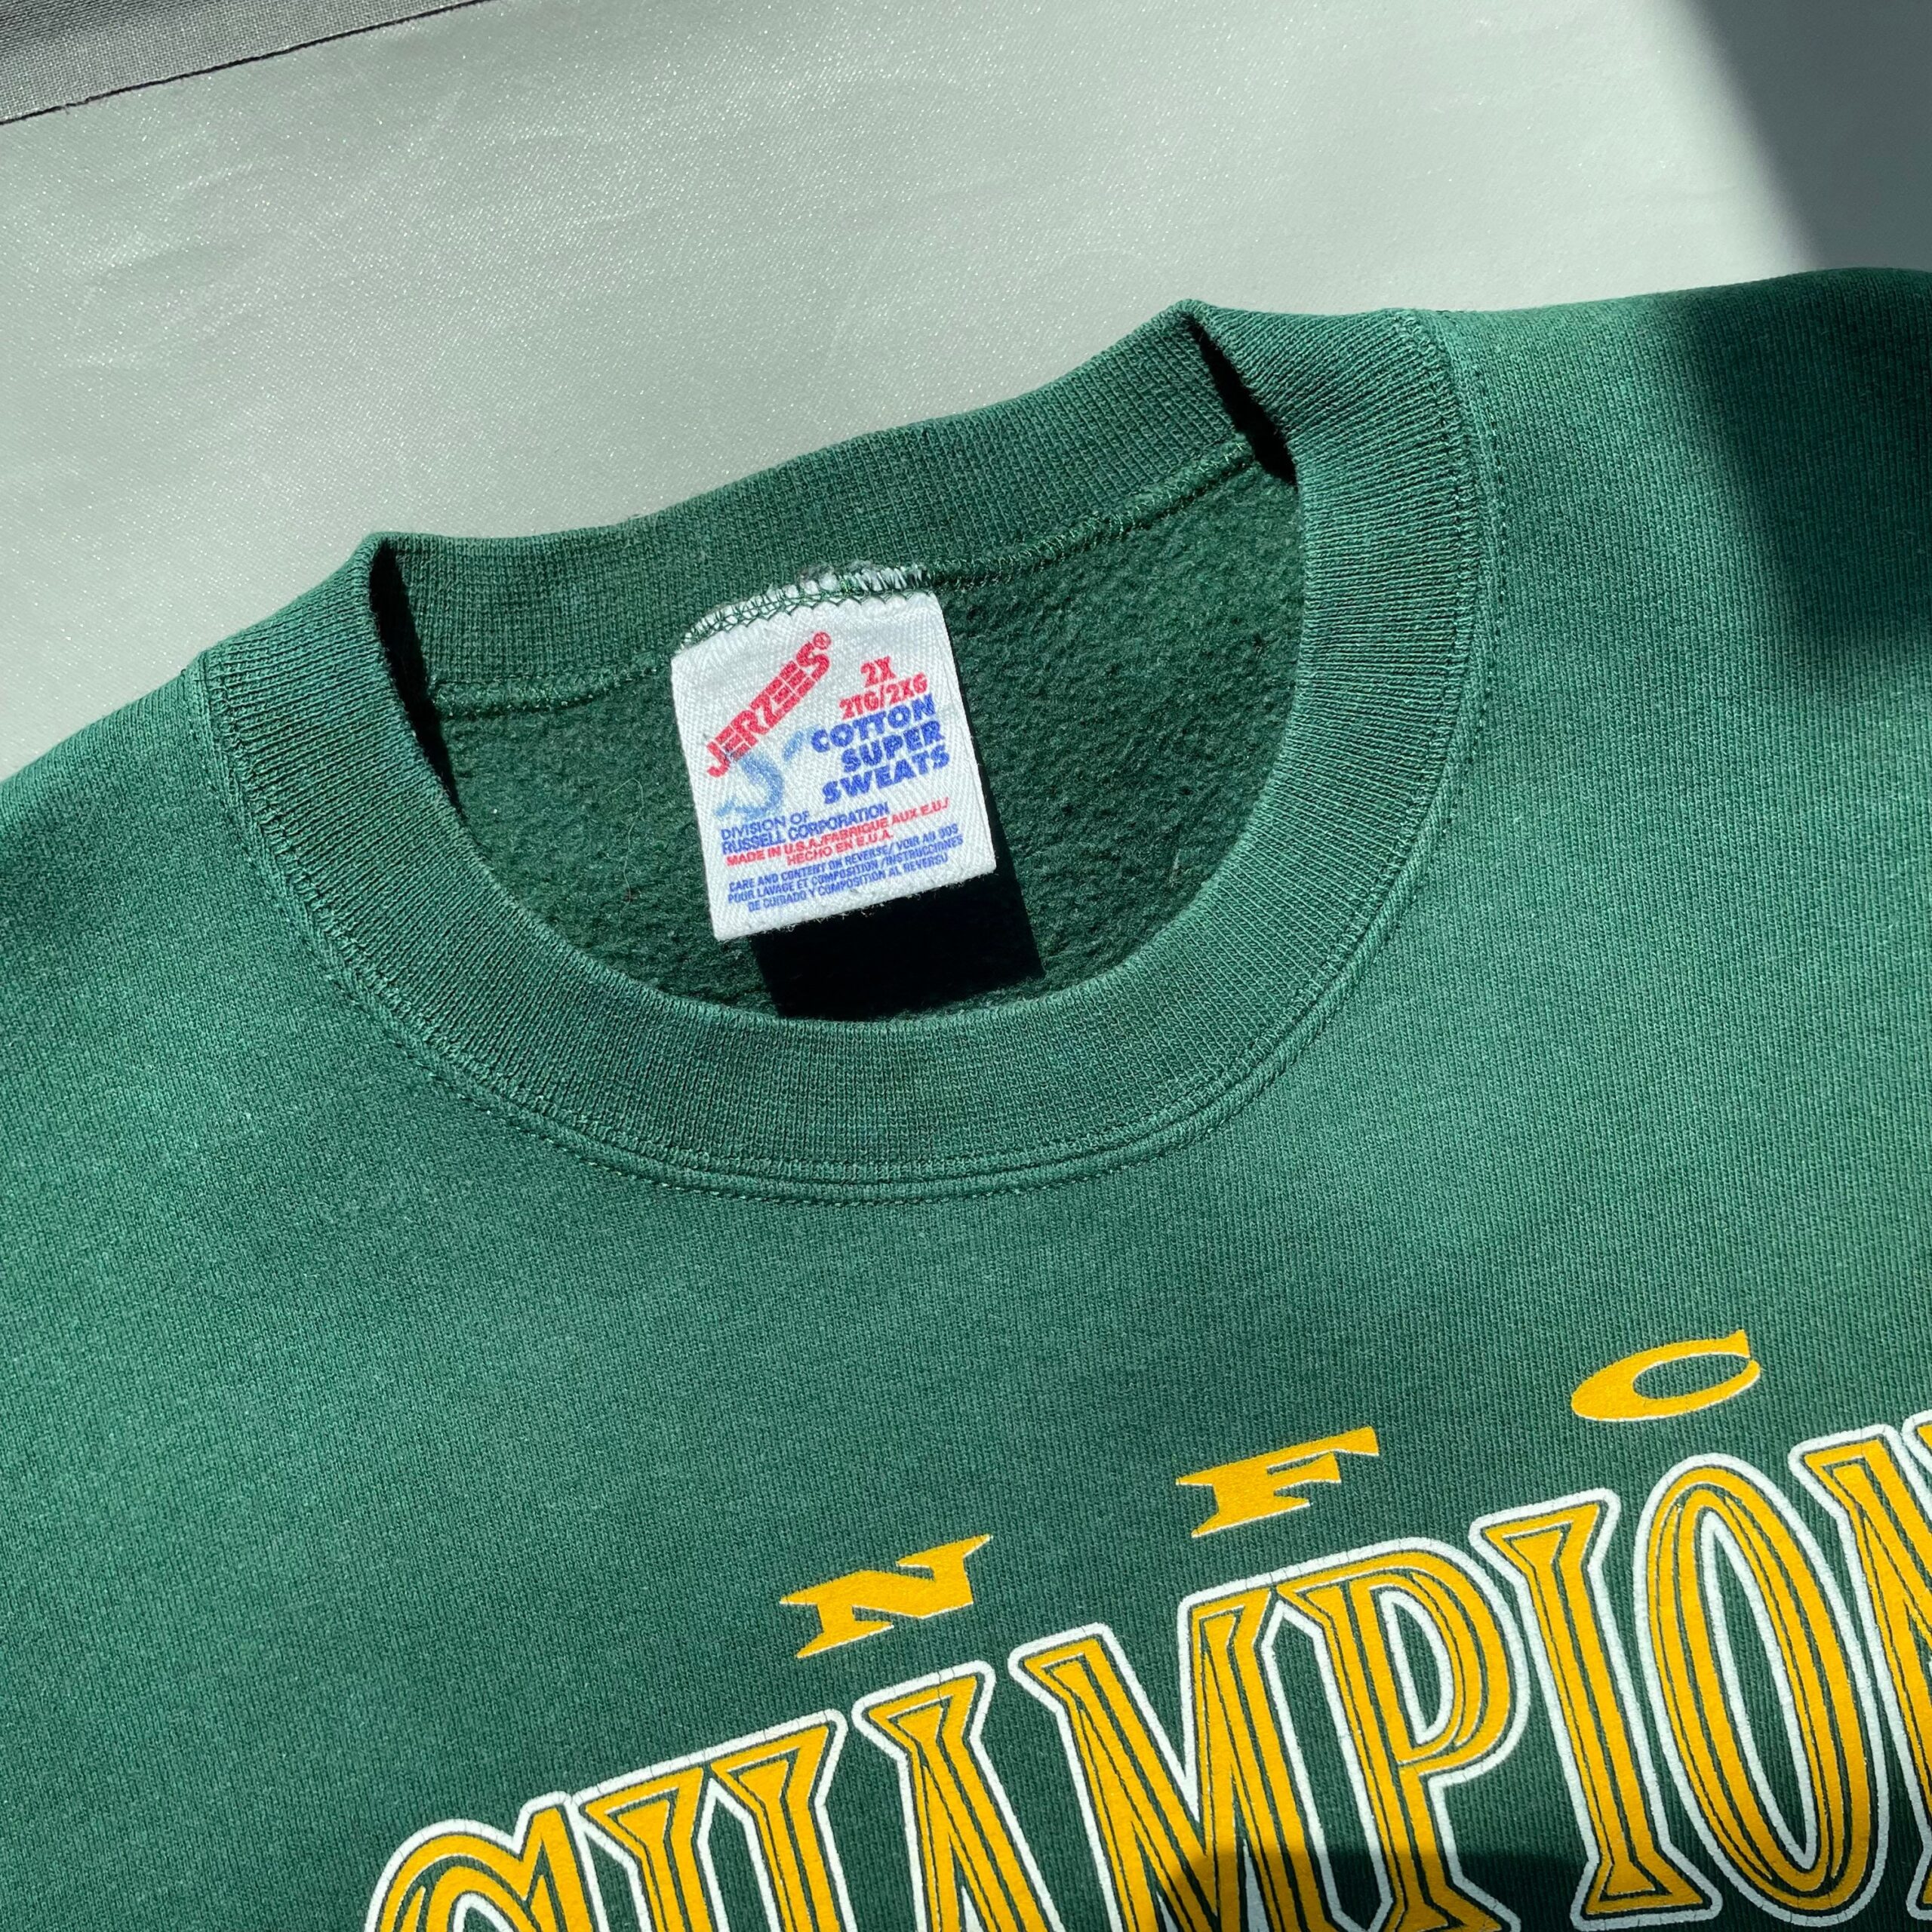 Vintage 1997 NFL Green Bay Packers Super Bowl Champions Nfc North Shirt -  Teeholly